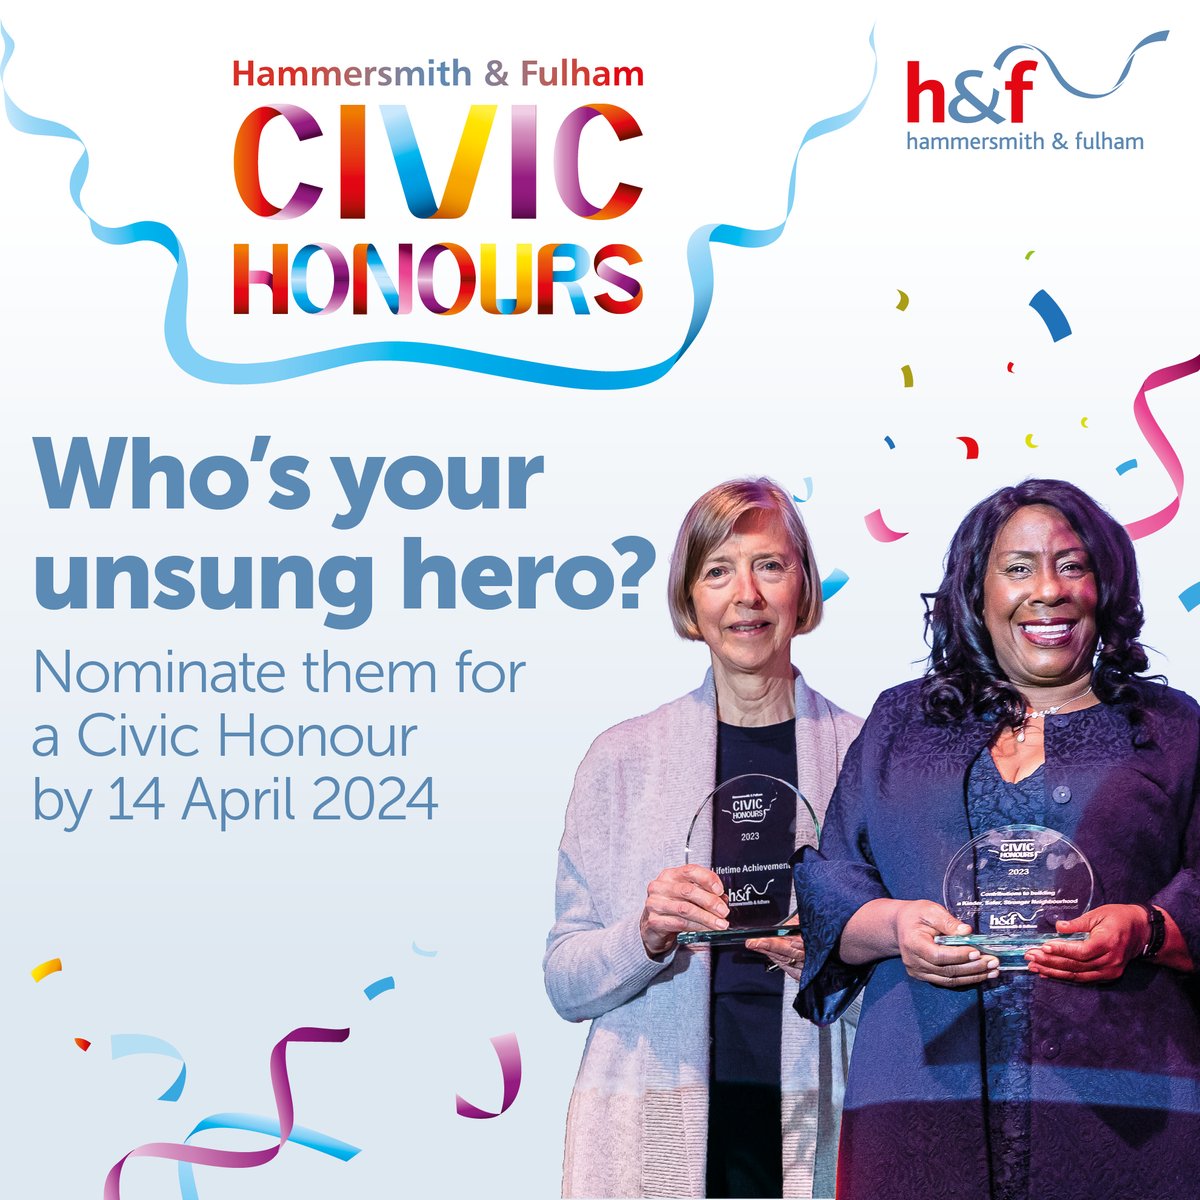 Nominate your H&F Hero for a 2024 Civic Honour! It’s that time of year when we celebrate the exceptional people who make Hammersmith & Fulham such a great place to live! The closing date for nominations is 14 April 2024. Nominate someone here: lbhf.gov.uk/community/hf-c…